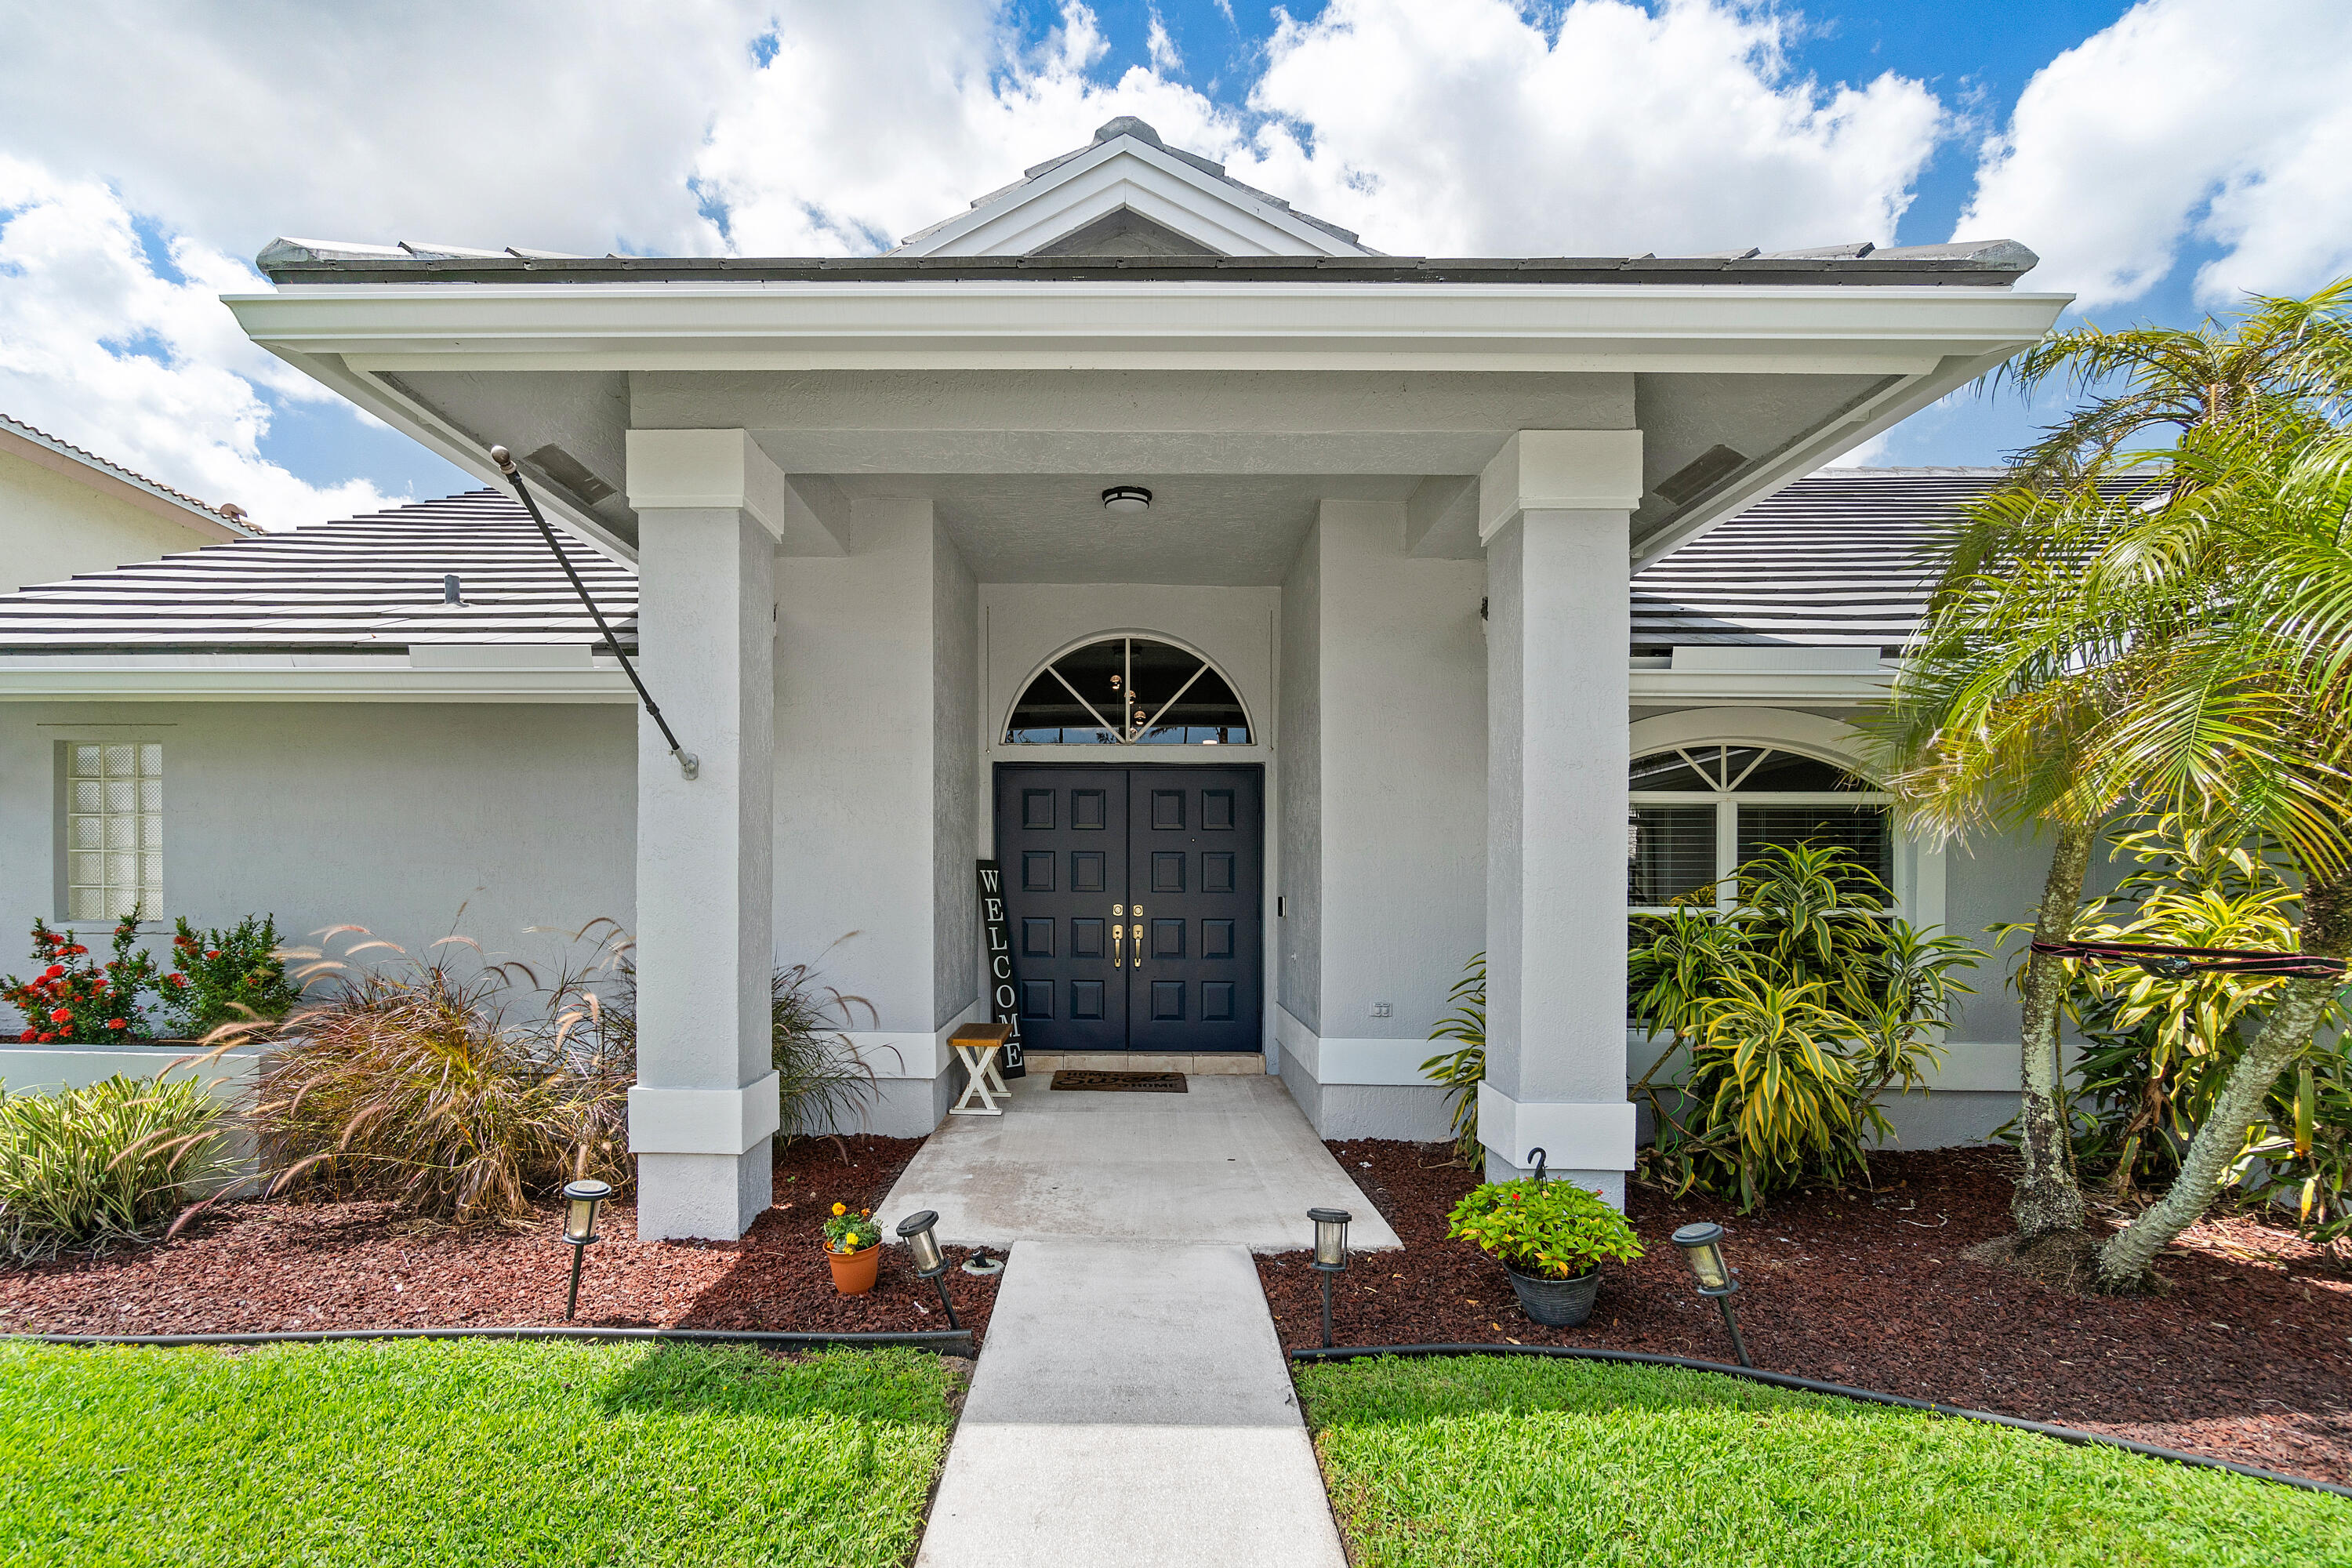 7210 Windy Preserve, Lake Worth, Palm Beach County, Florida - 4 Bedrooms  
2 Bathrooms - 